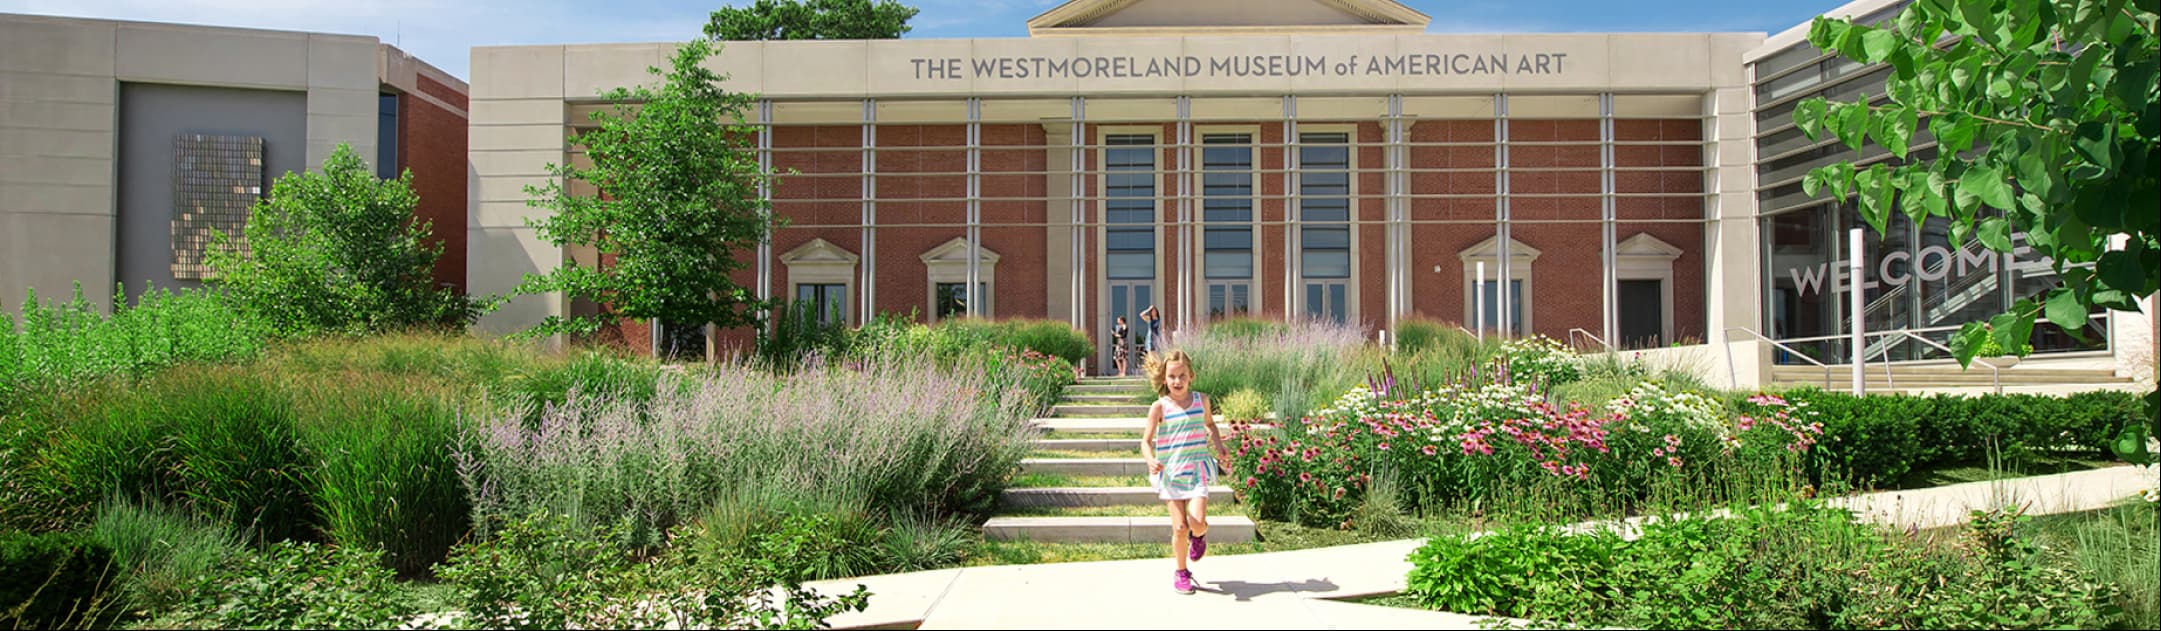 A young girl running down The Westmoreland Museum of American Art’s concrete front steps towards the camera, with The Museum’s front entrance in the background, surrounded by bushes, trees, and flowers.